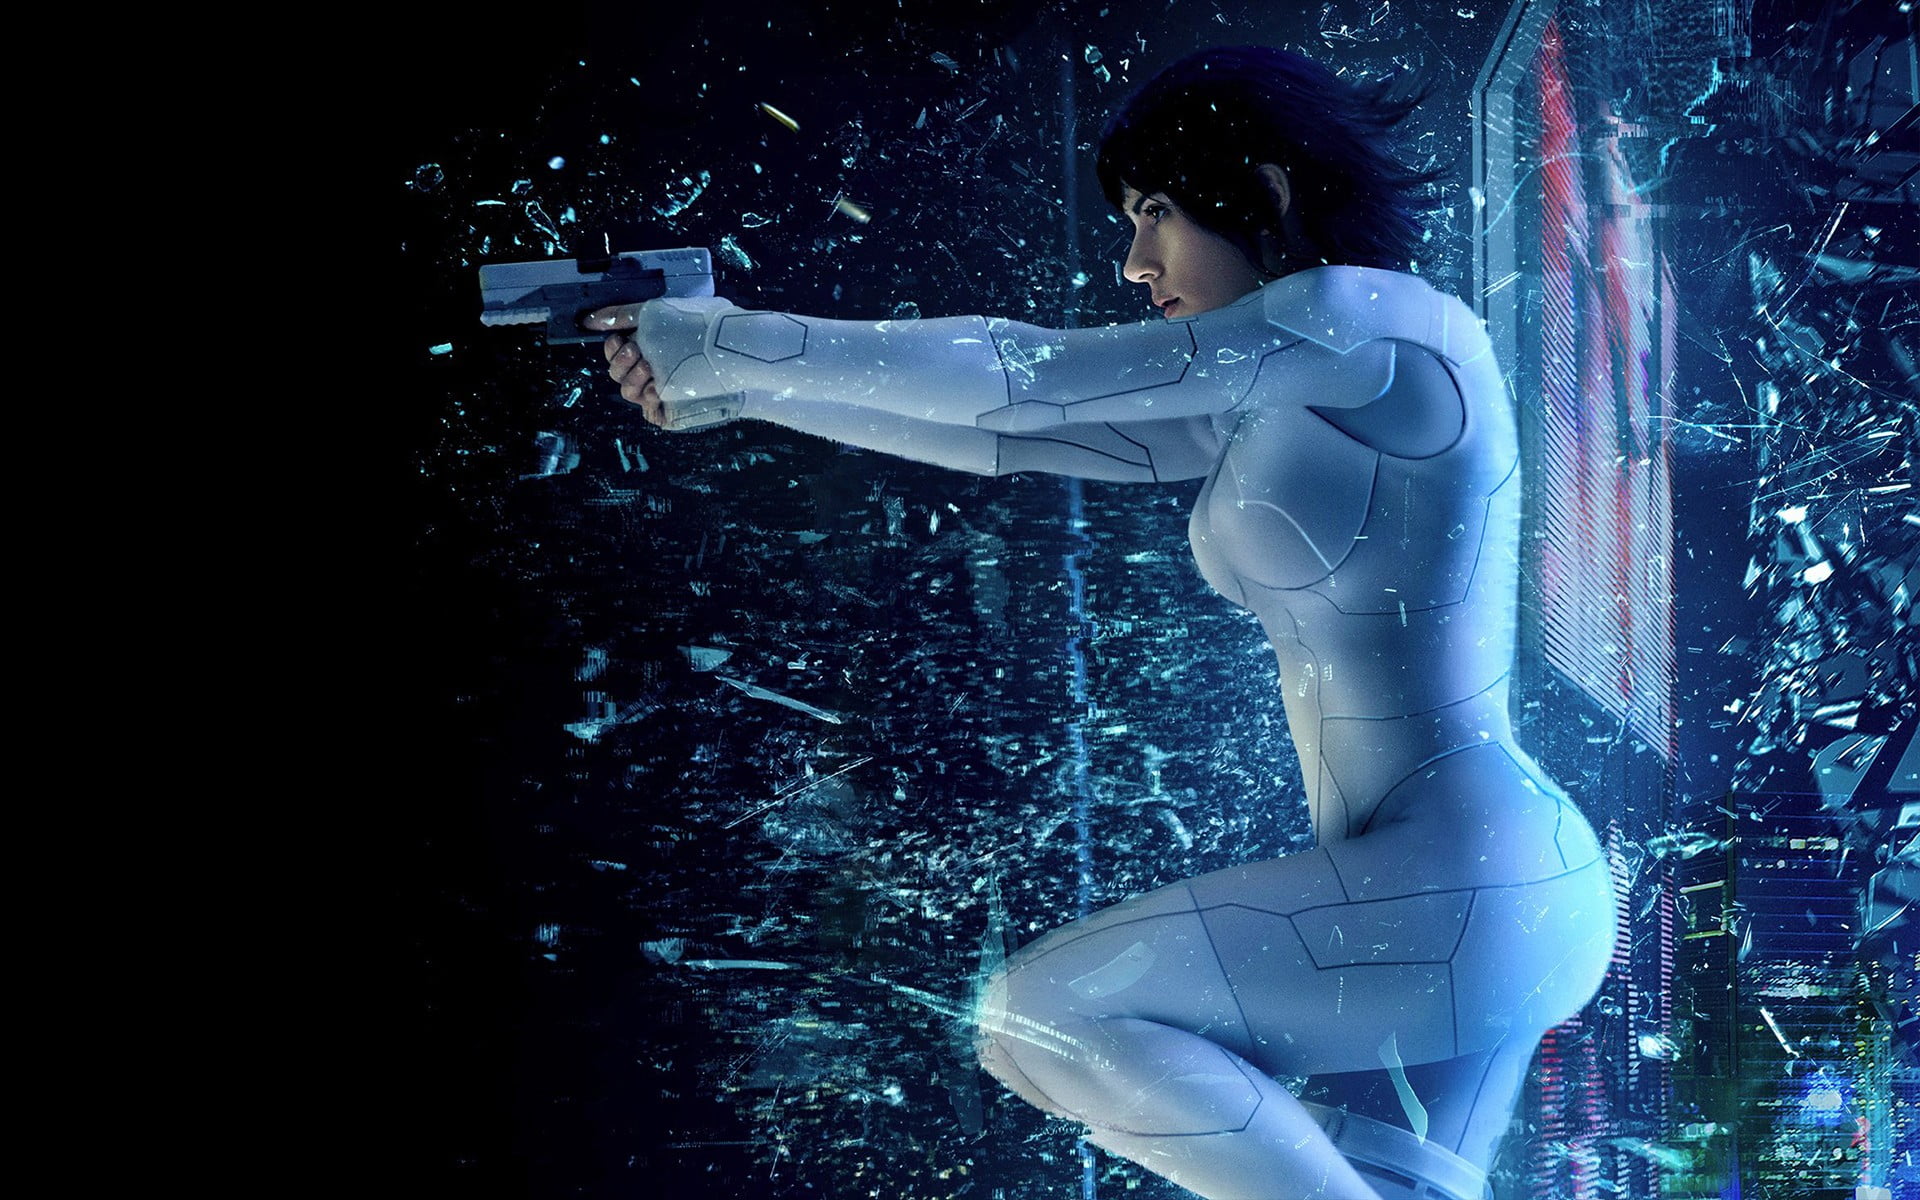 Scarlet Johanson Ghost In The Shell Scarlett Johansson Movies Images, Photos, Reviews